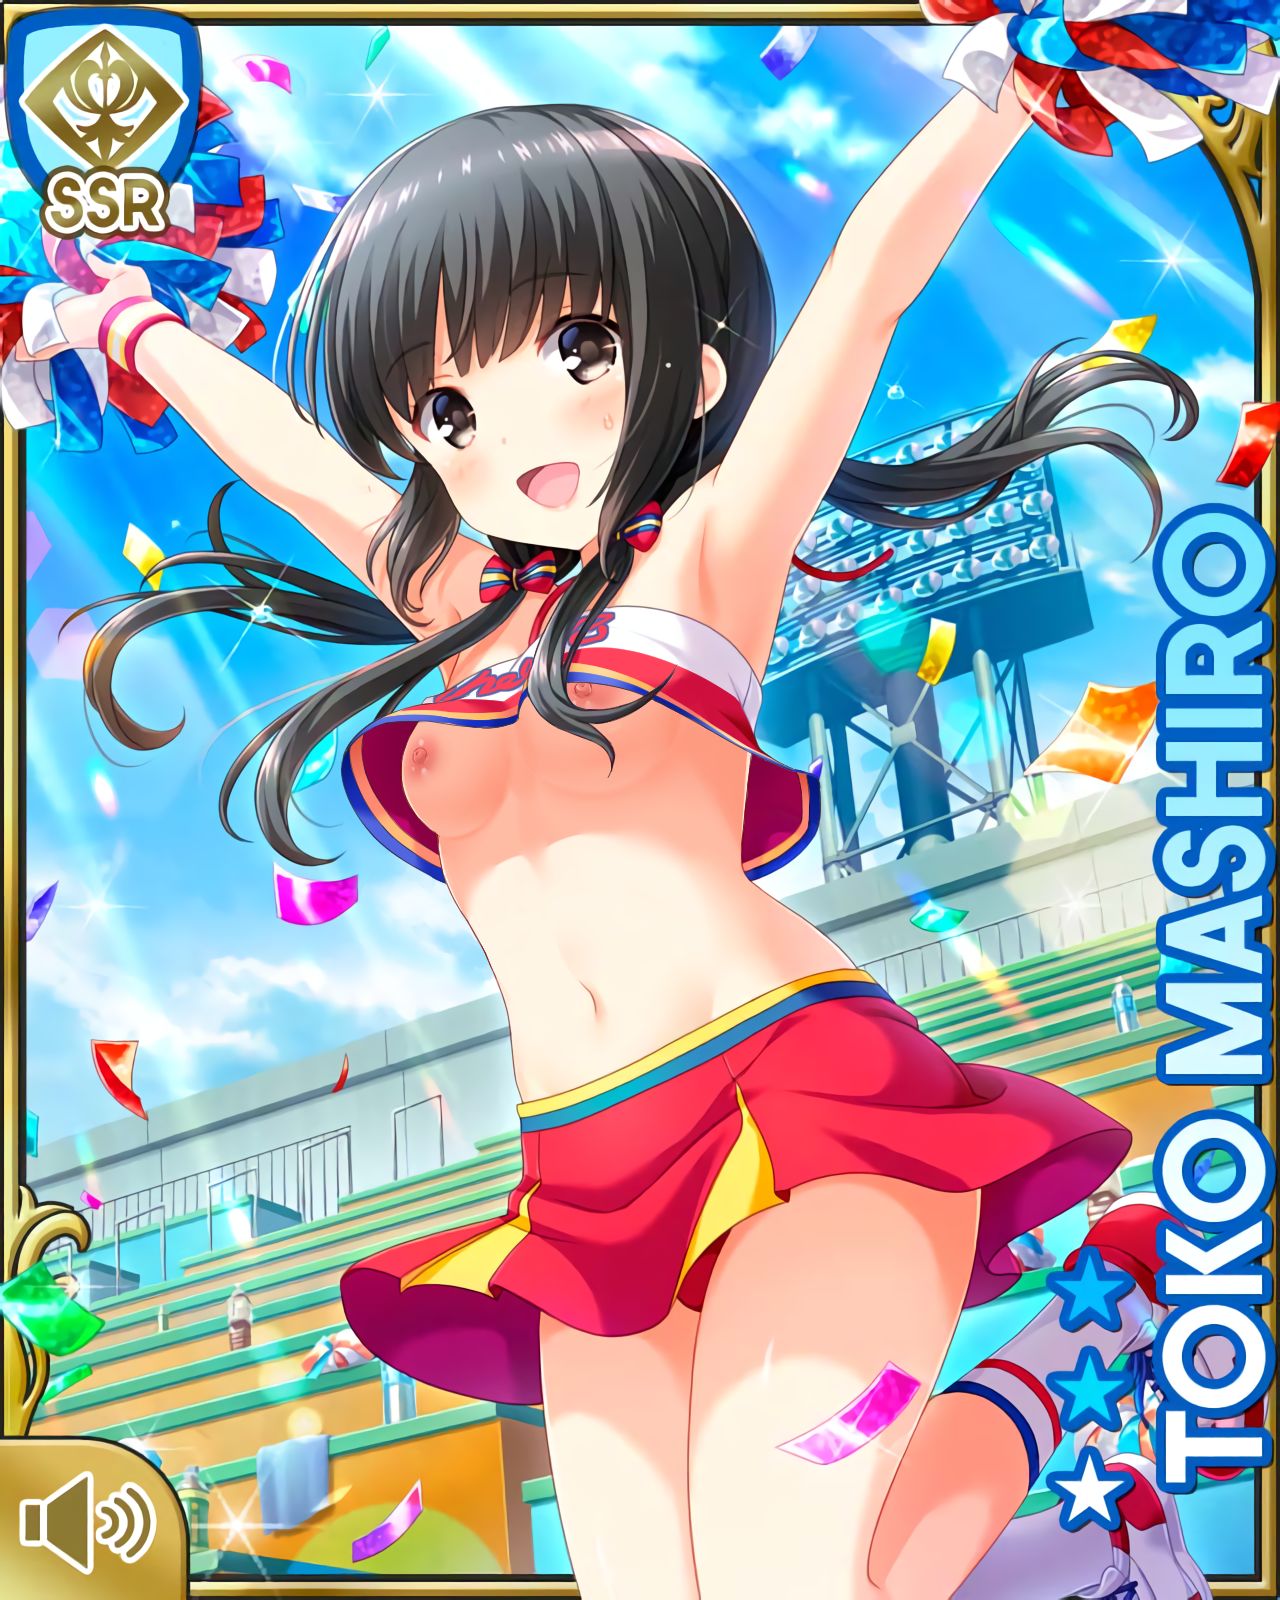 [Stripped Kora] a large amount of stripped Kora image, such as anime official picture part 362 21